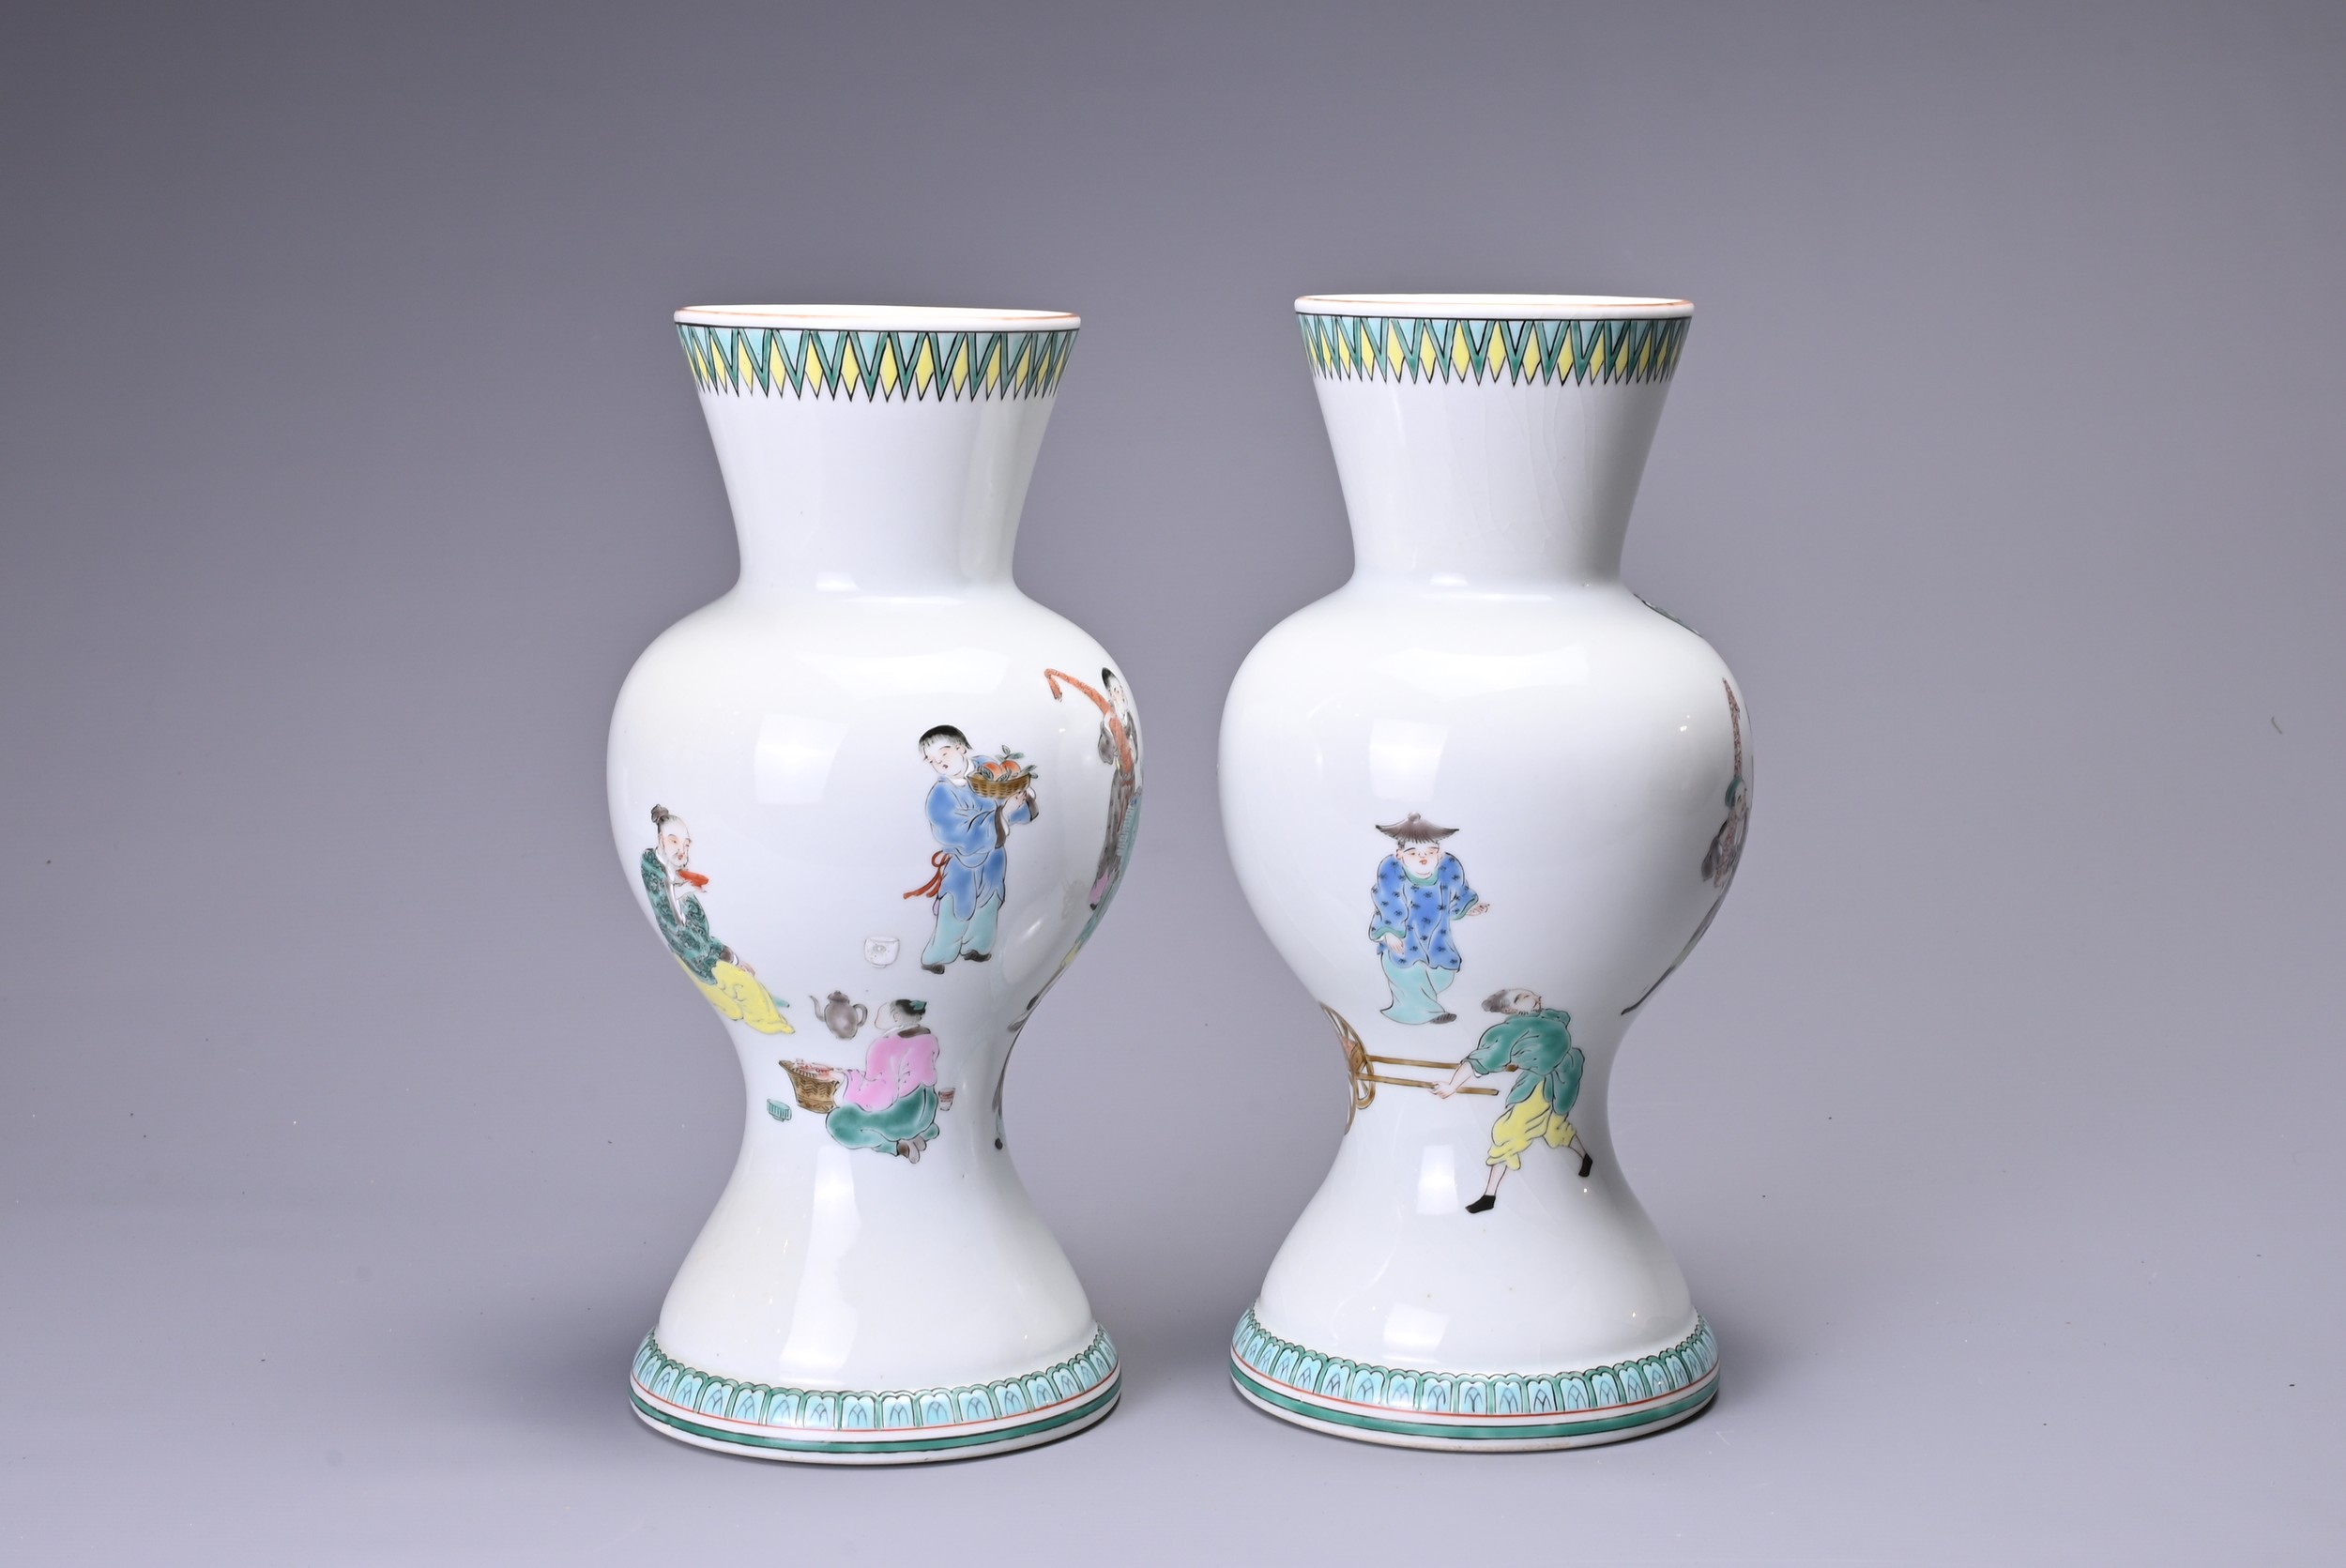 A PAIR OF 20TH CENTURY JAPANESE PORCELAIN FAMILLE VERTE-STYLE BALUSTER VASES. Each with green and - Image 2 of 7